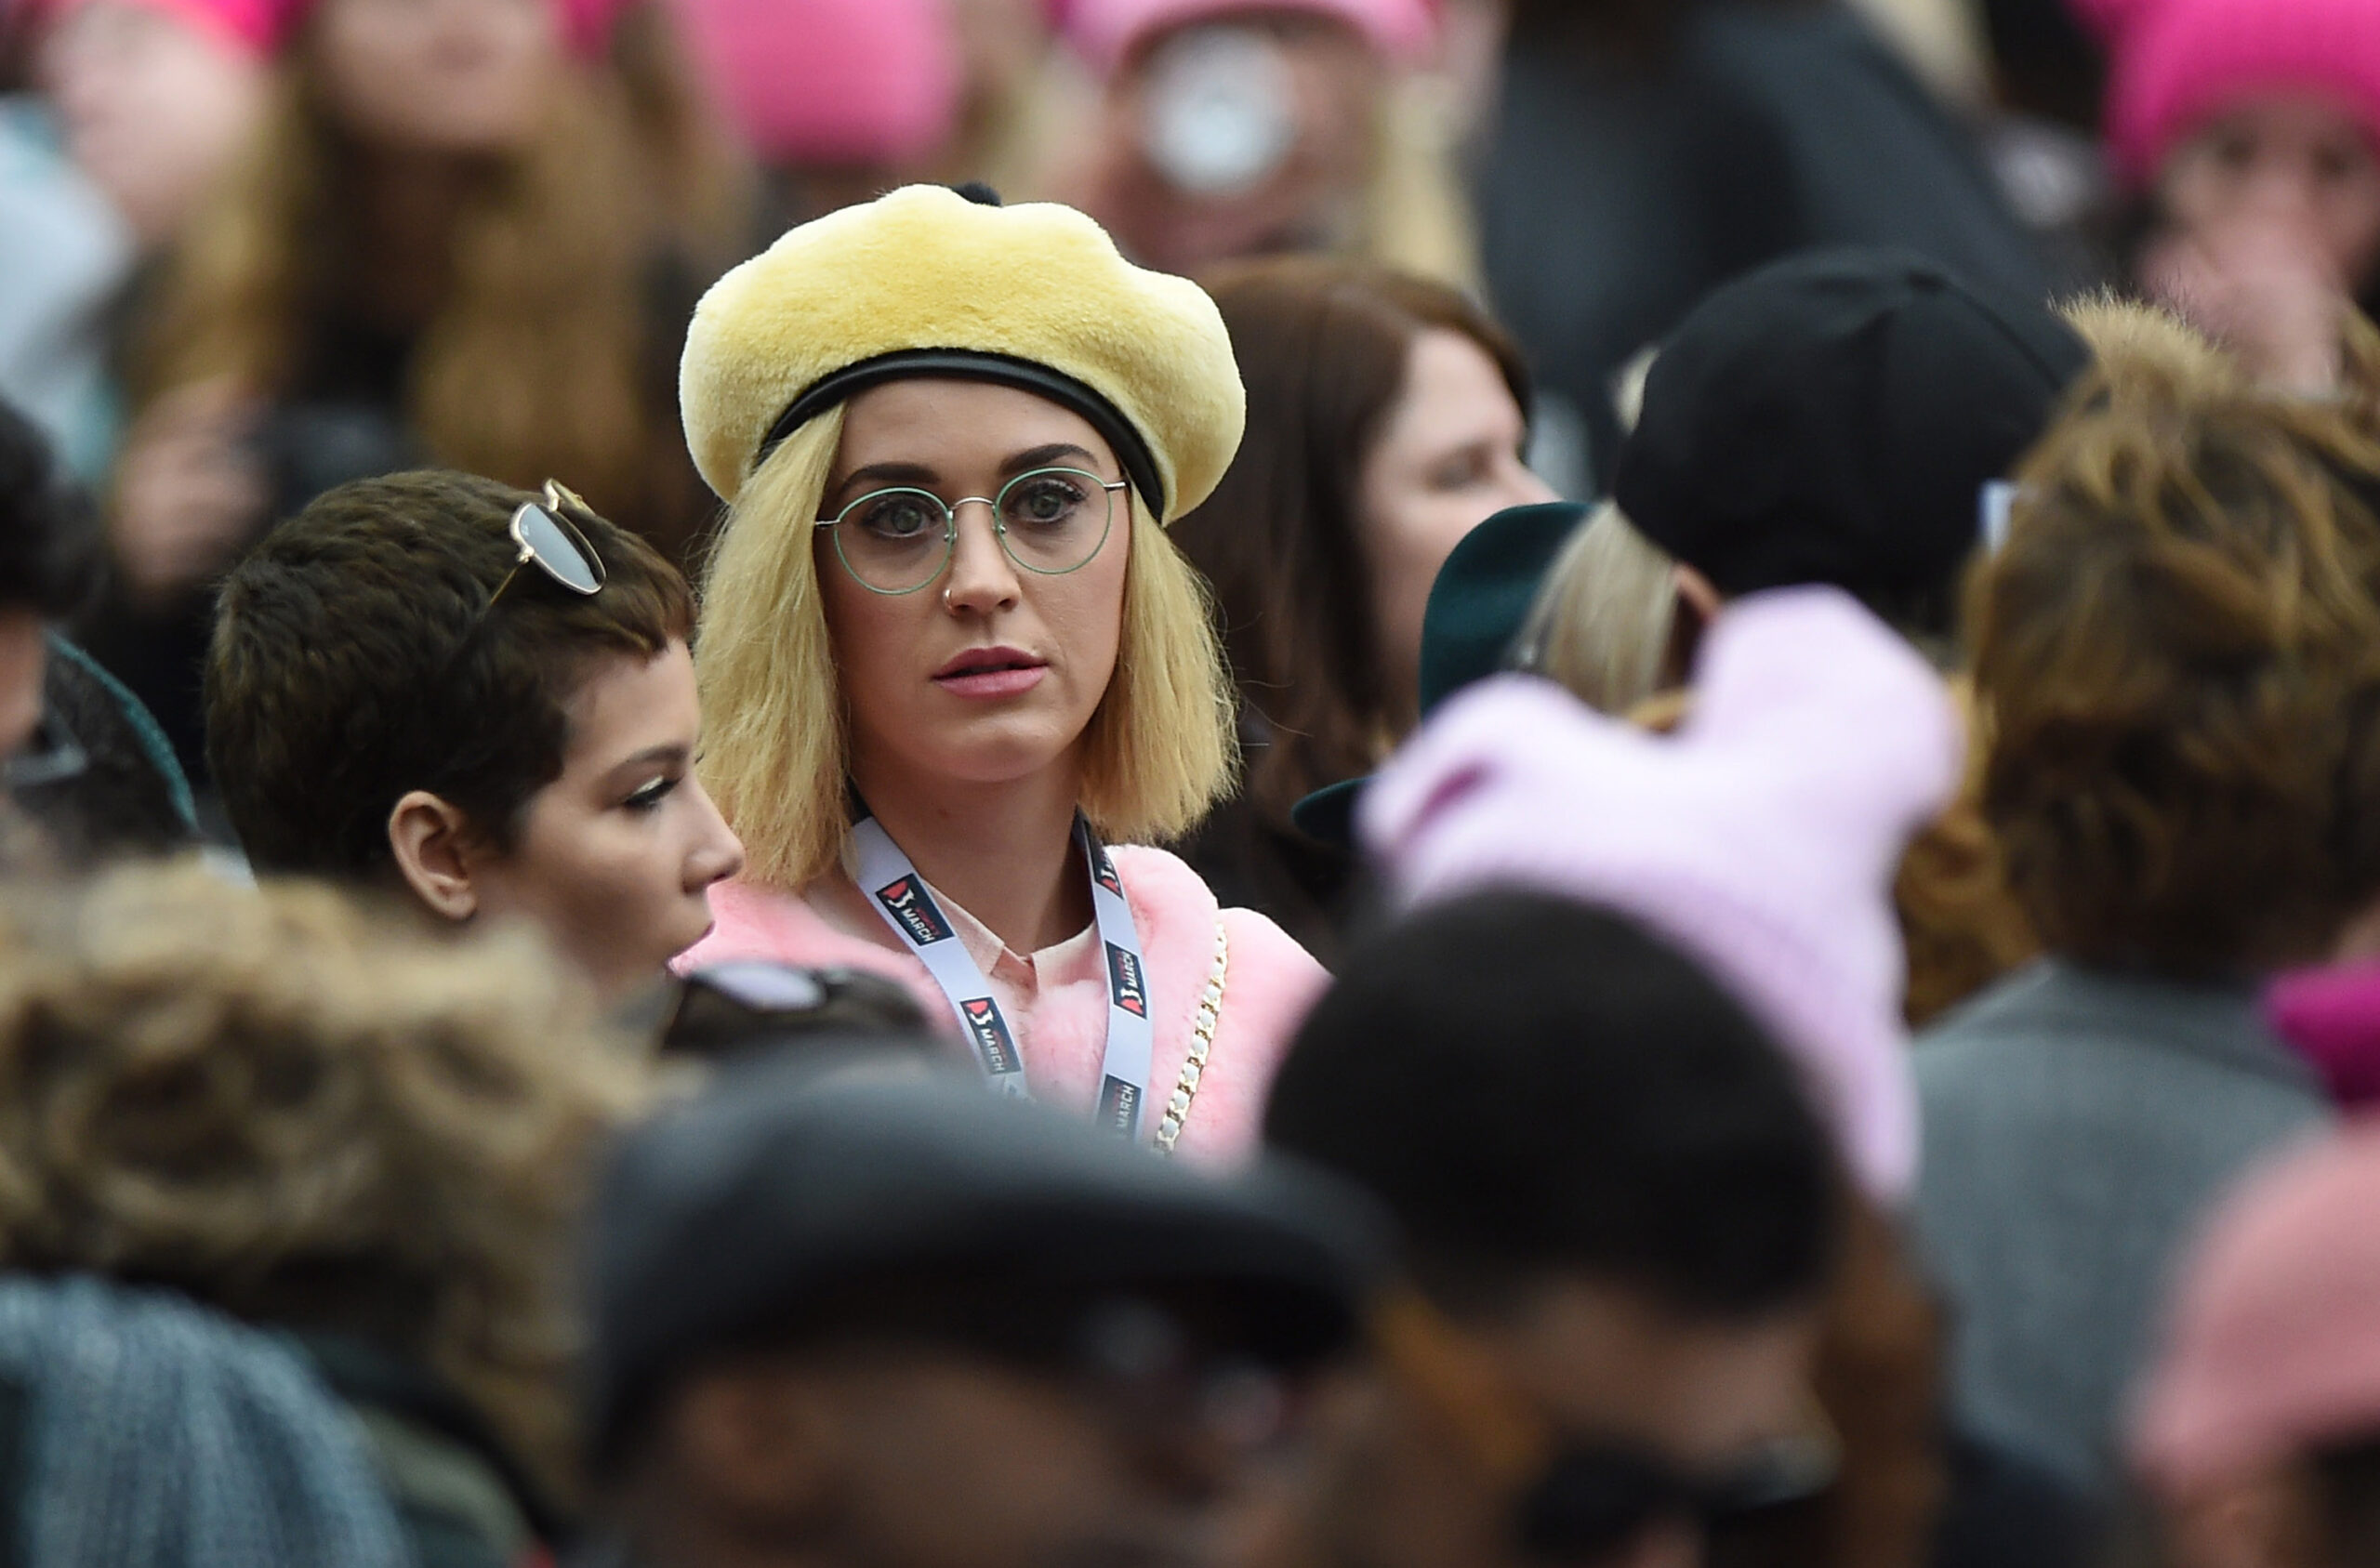 Katy Perry attends the Women's March on Washington on Jan. 21, 2017 in Washington, DC. (Lionel Hahn/Abaca Press/TNS)